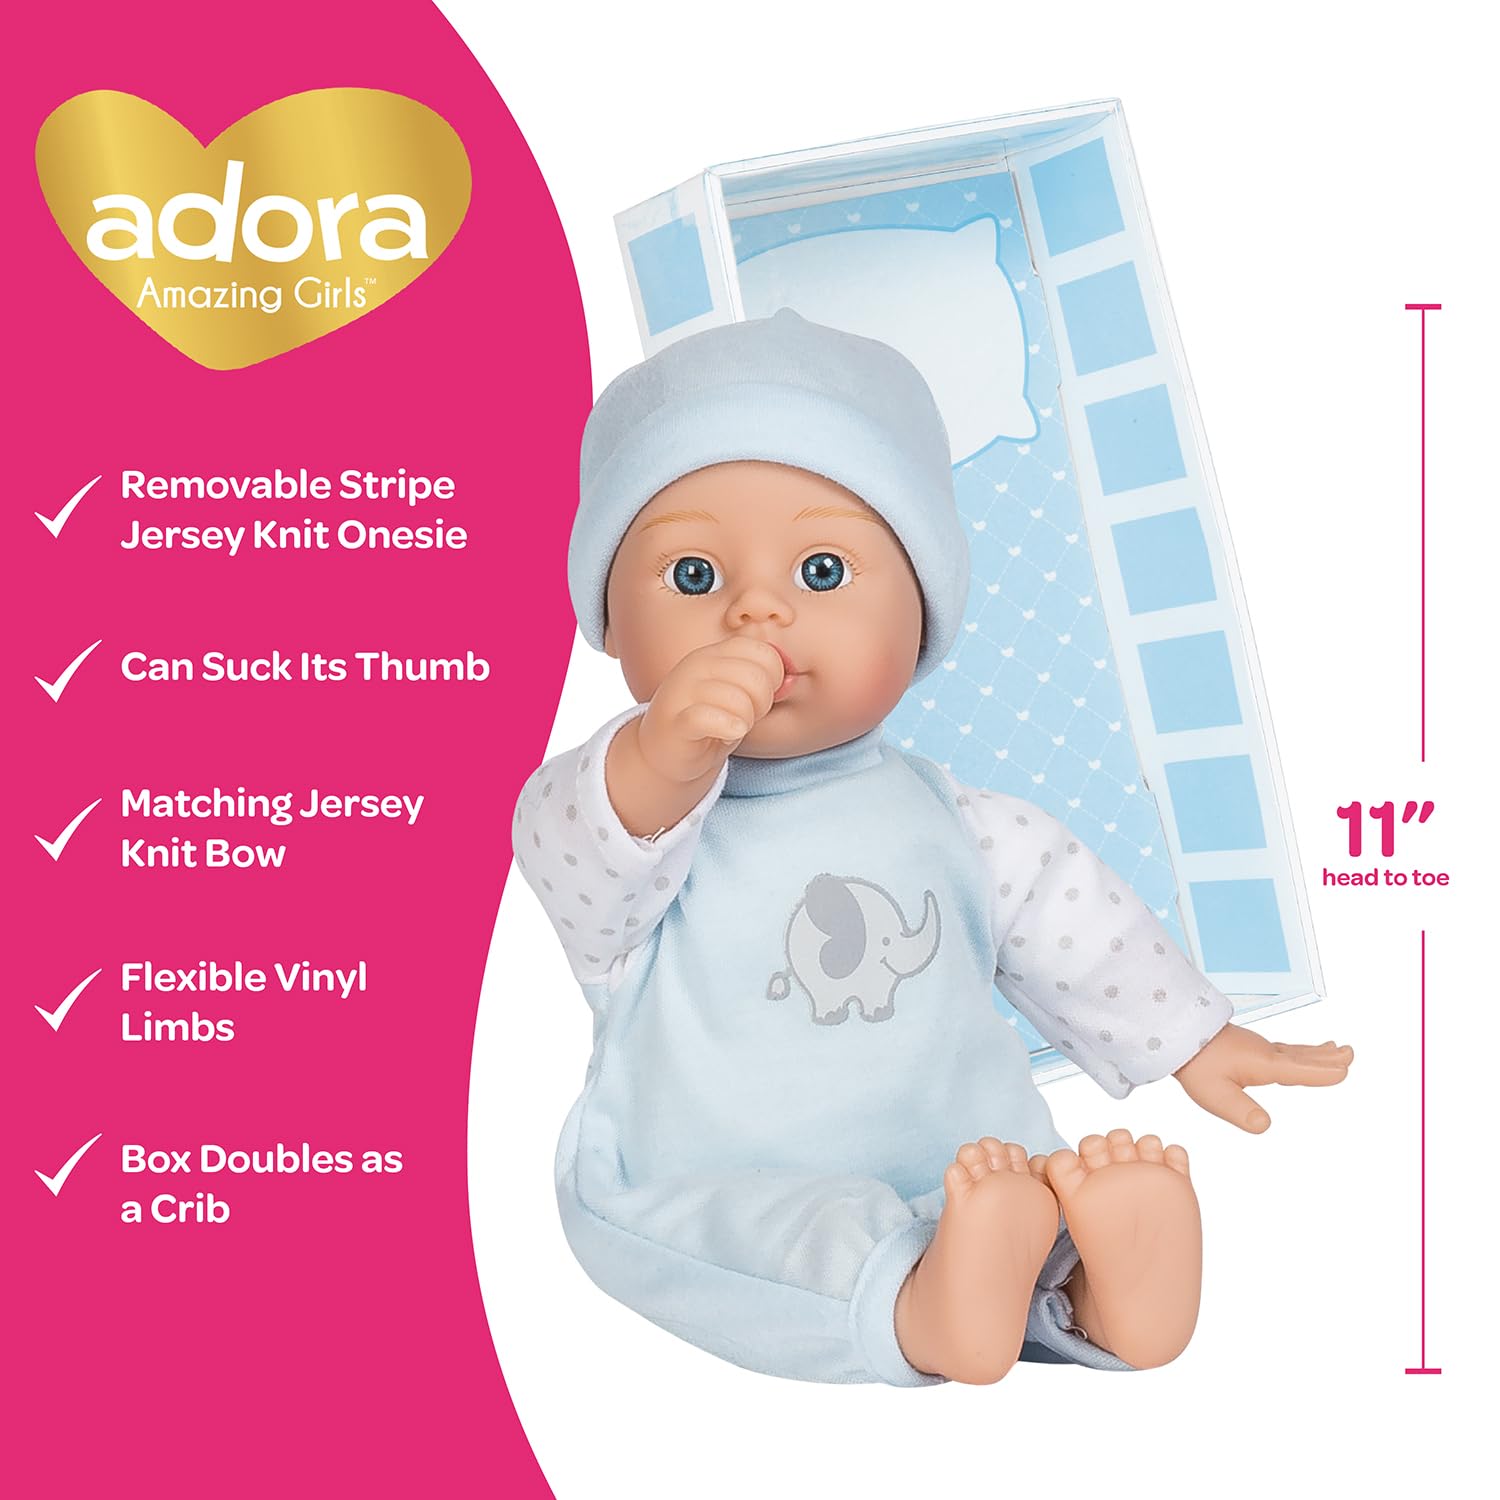 Adora Sweet Baby Boy Peanut - Machine Washable Baby Doll Age 1+ (Amazon Exclusive), 11 inches, Blue